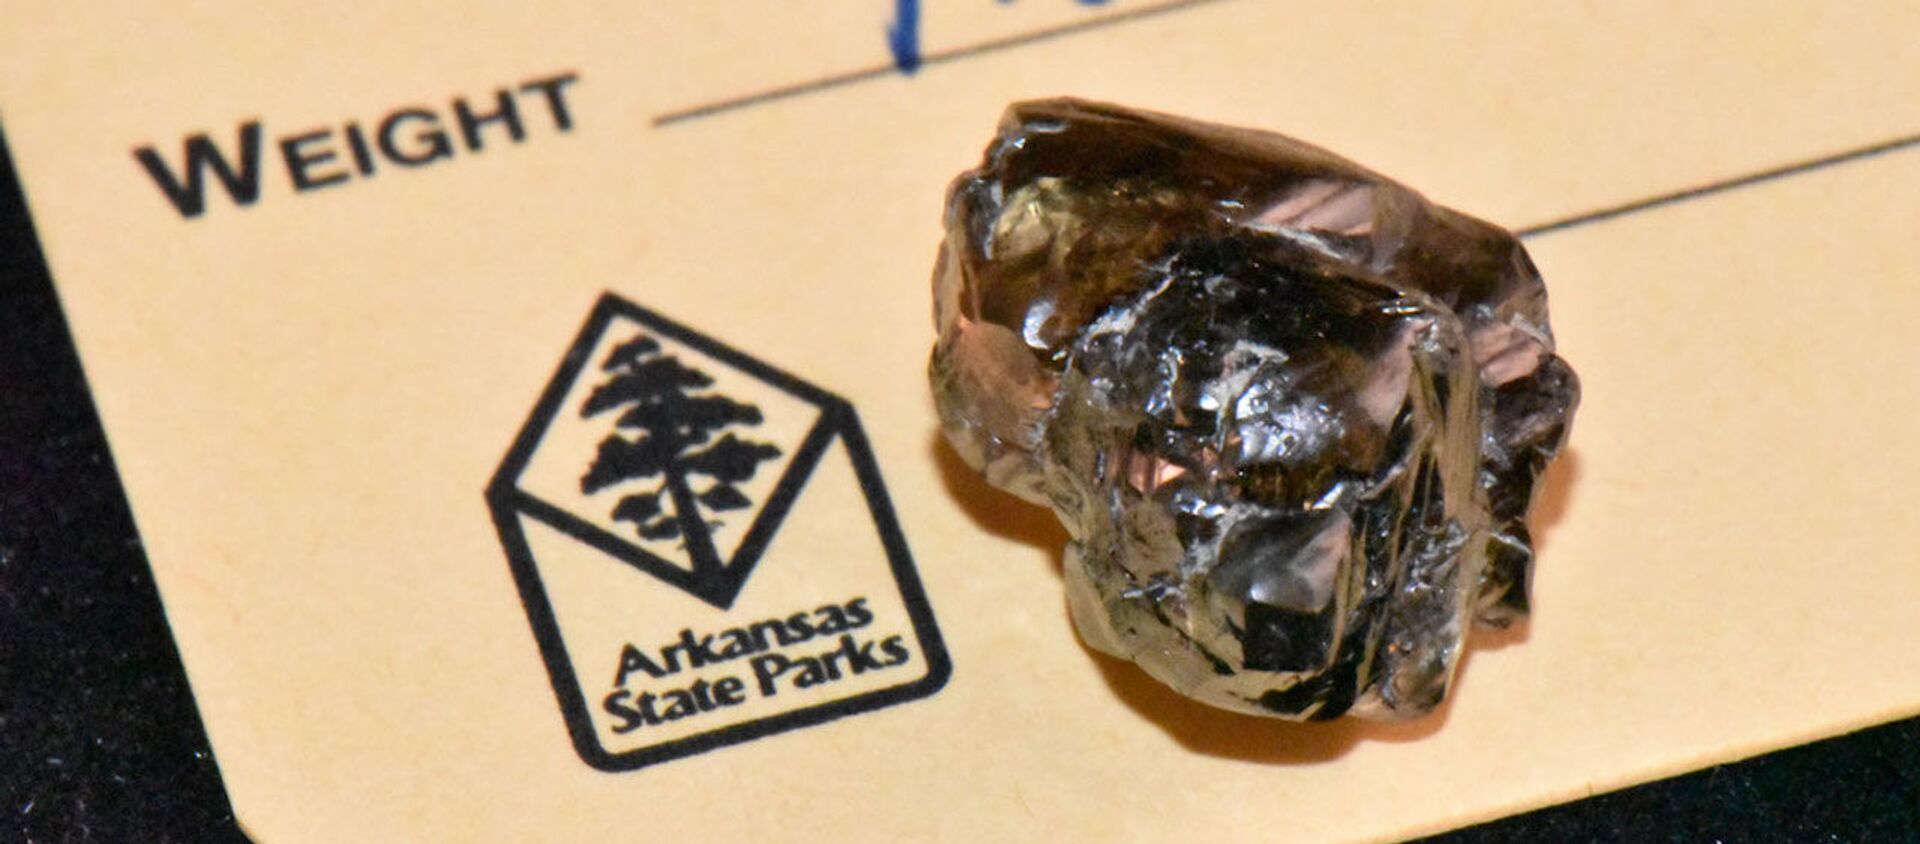 Image provided by the Arkansas State Parks offers closeup view of the Kinard Friendship Diamond, along with an official state park tag indicating its official weight and documentation by park officials. - Sputnik International, 1920, 24.09.2020